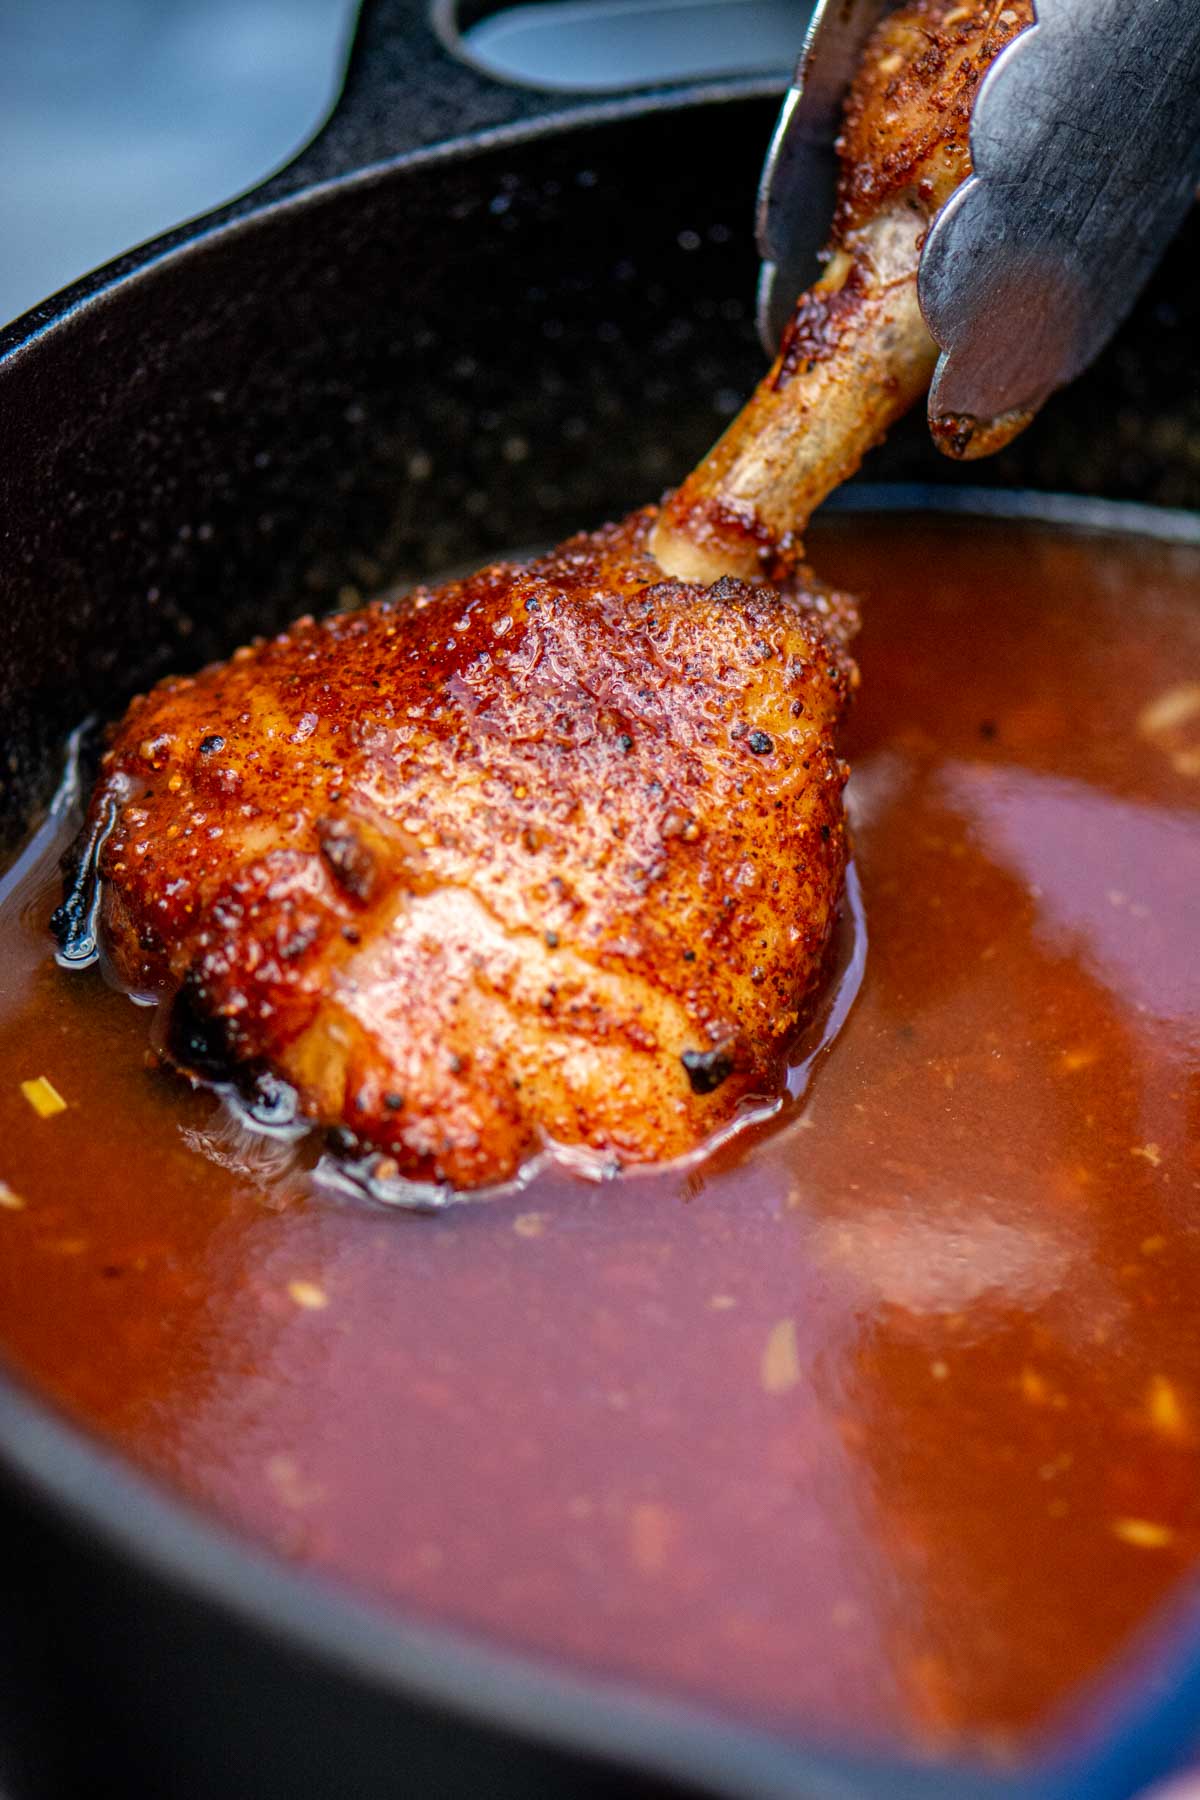 Dipping the chicken lollipop into the homemade sweet BBQ sauce.